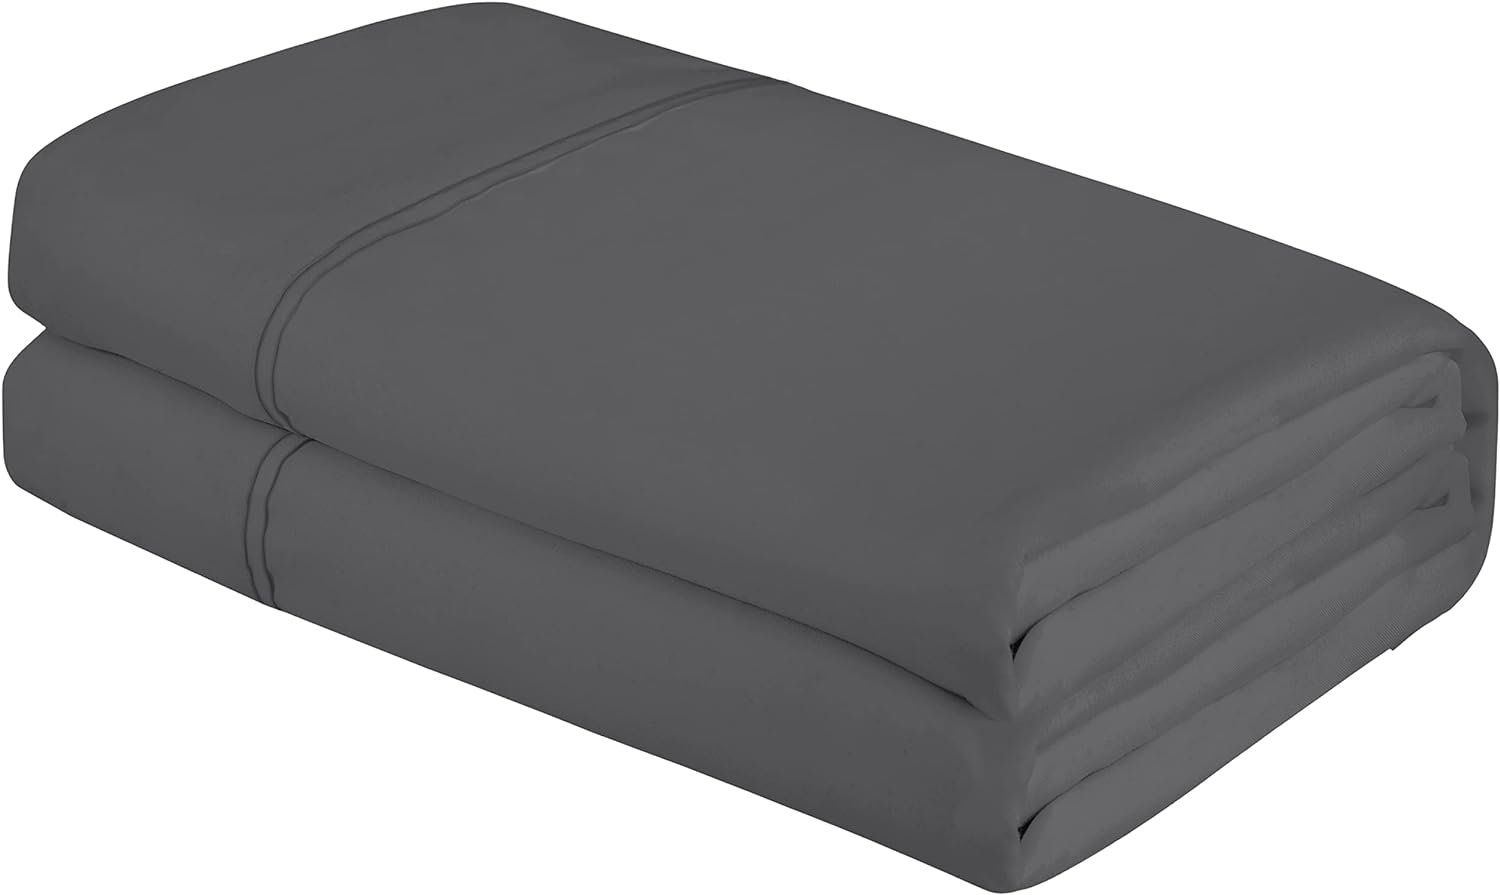 Royale Linens Full Size Flat Sheet Only - Brushed 1800 Microfiber - Ultra Soft & Breathable - Wrinkle & Stain Resistant - Hotel Quality Flat Sheet Sold Separately - Top Sheet for Bed - (Full, Grey)